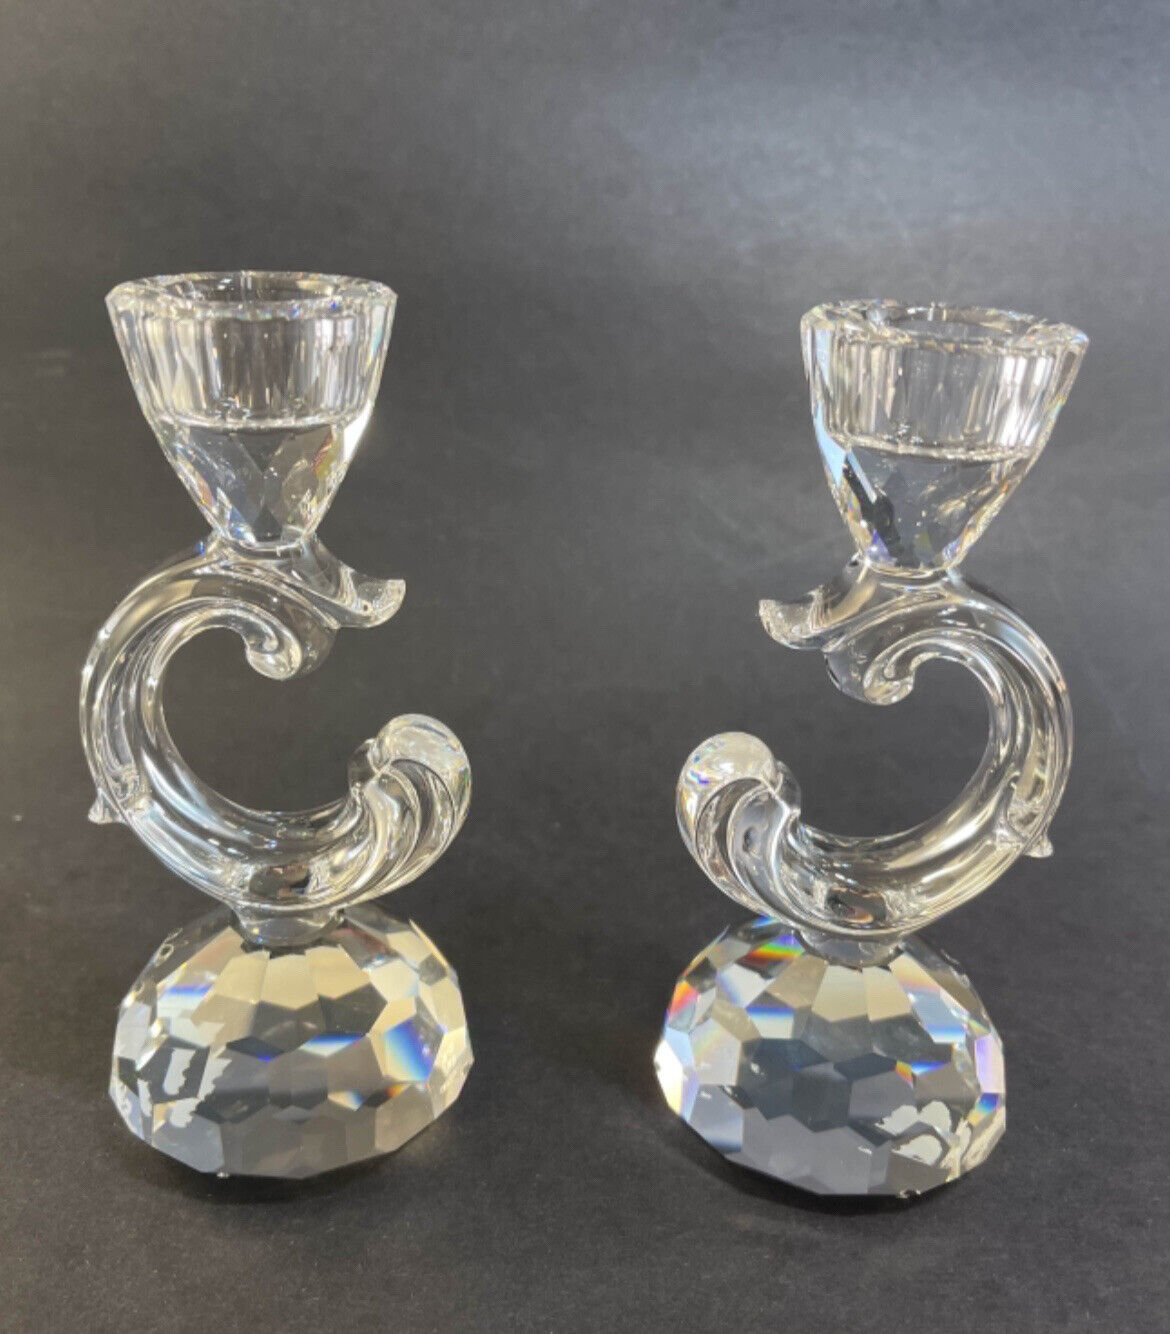 pair of Baroque Candleholders - 1983-1986 Accessories Home Decor